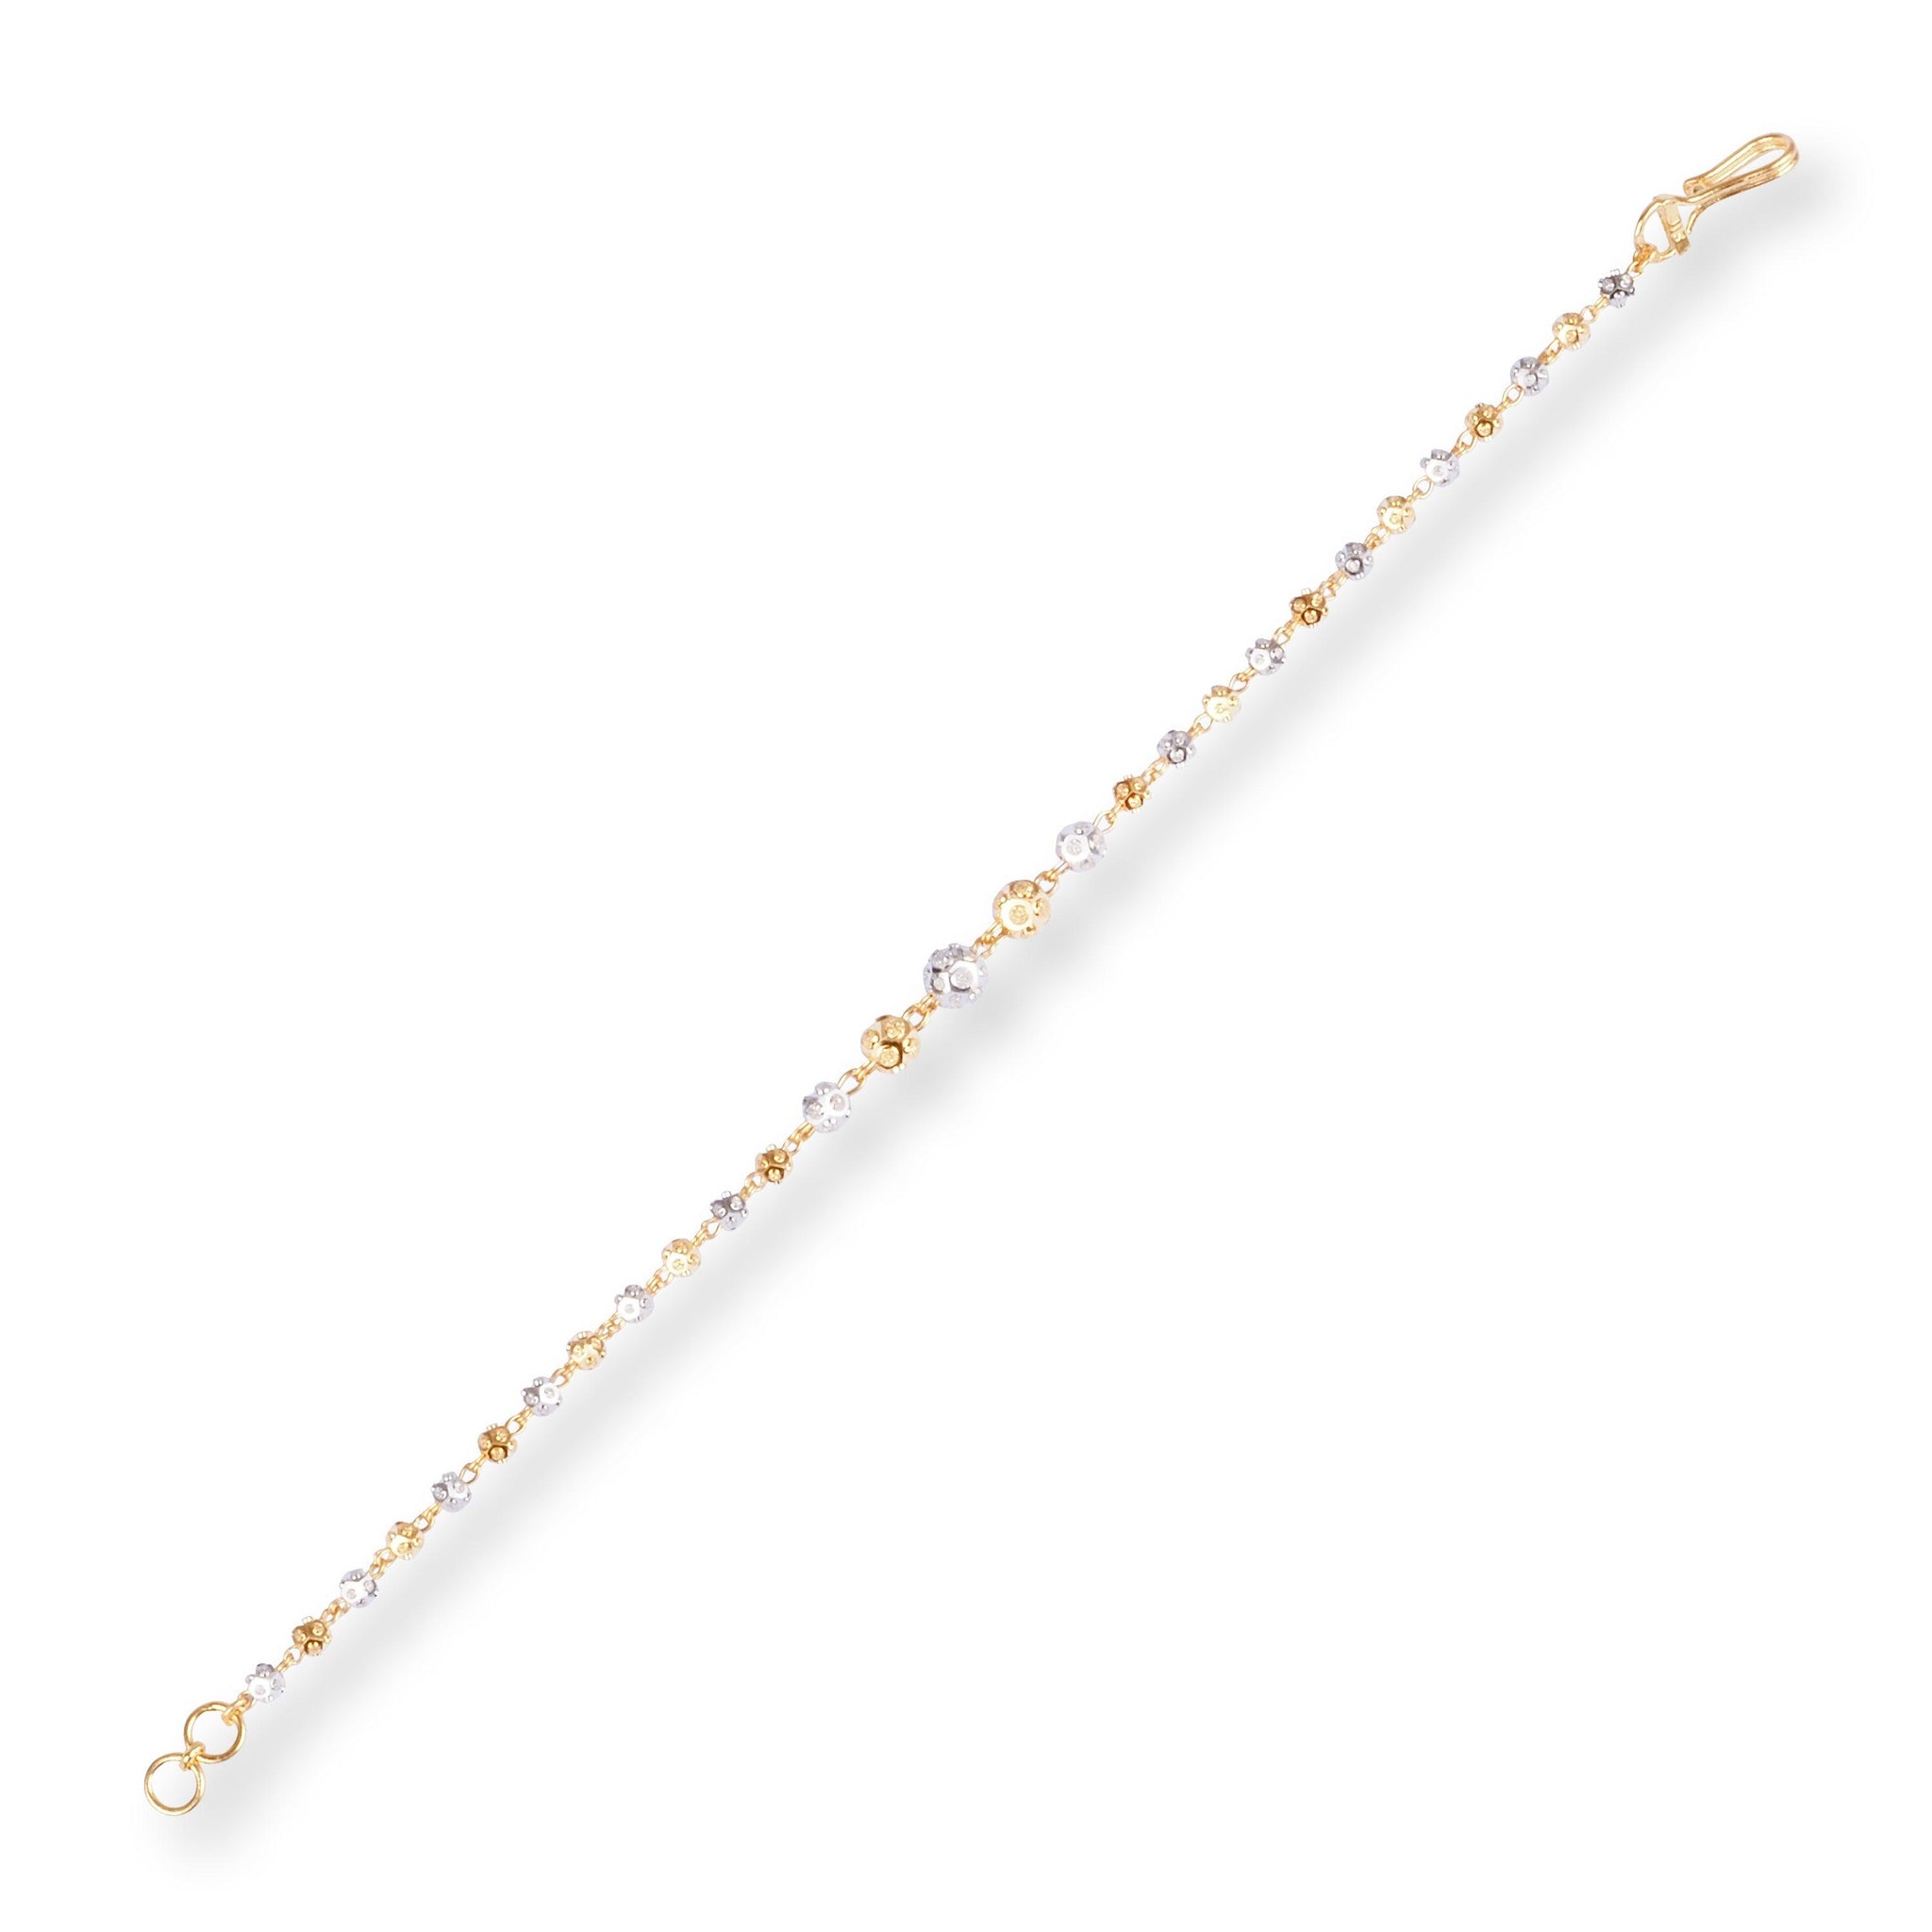 22ct Gold Bracelet with Diamond Cut Beads in Rhodium Design and Hook Clasp LBR-8498